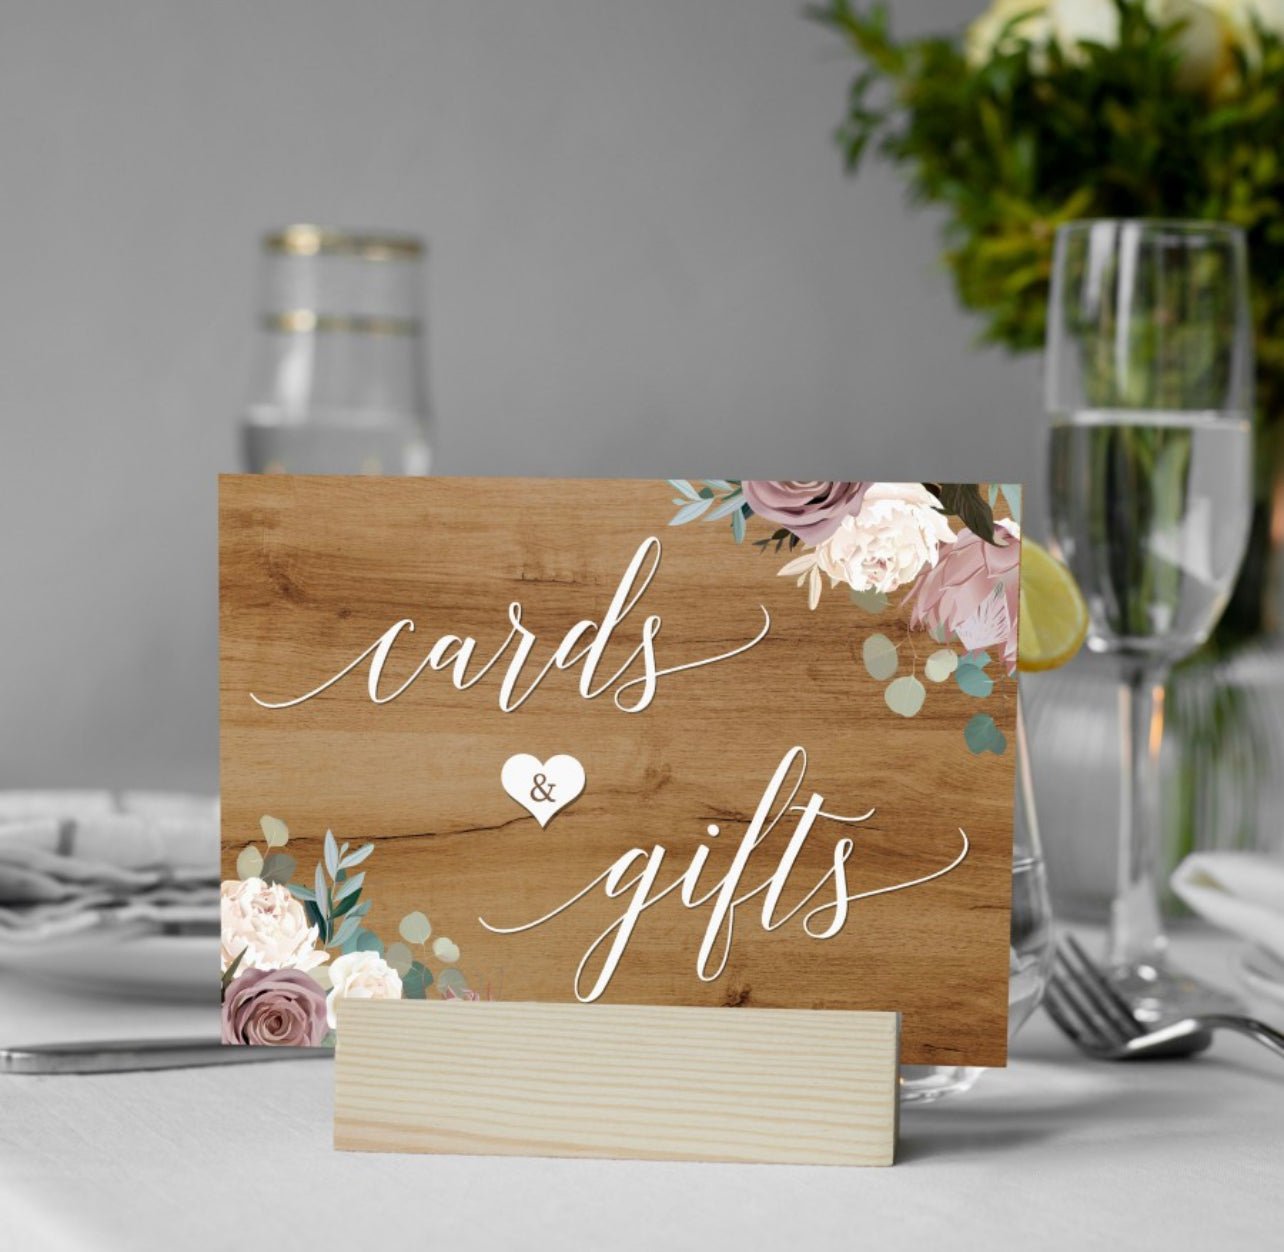 Wooden Dusky Rose Cards & Gifts Sign - Cute as a Button by Laura